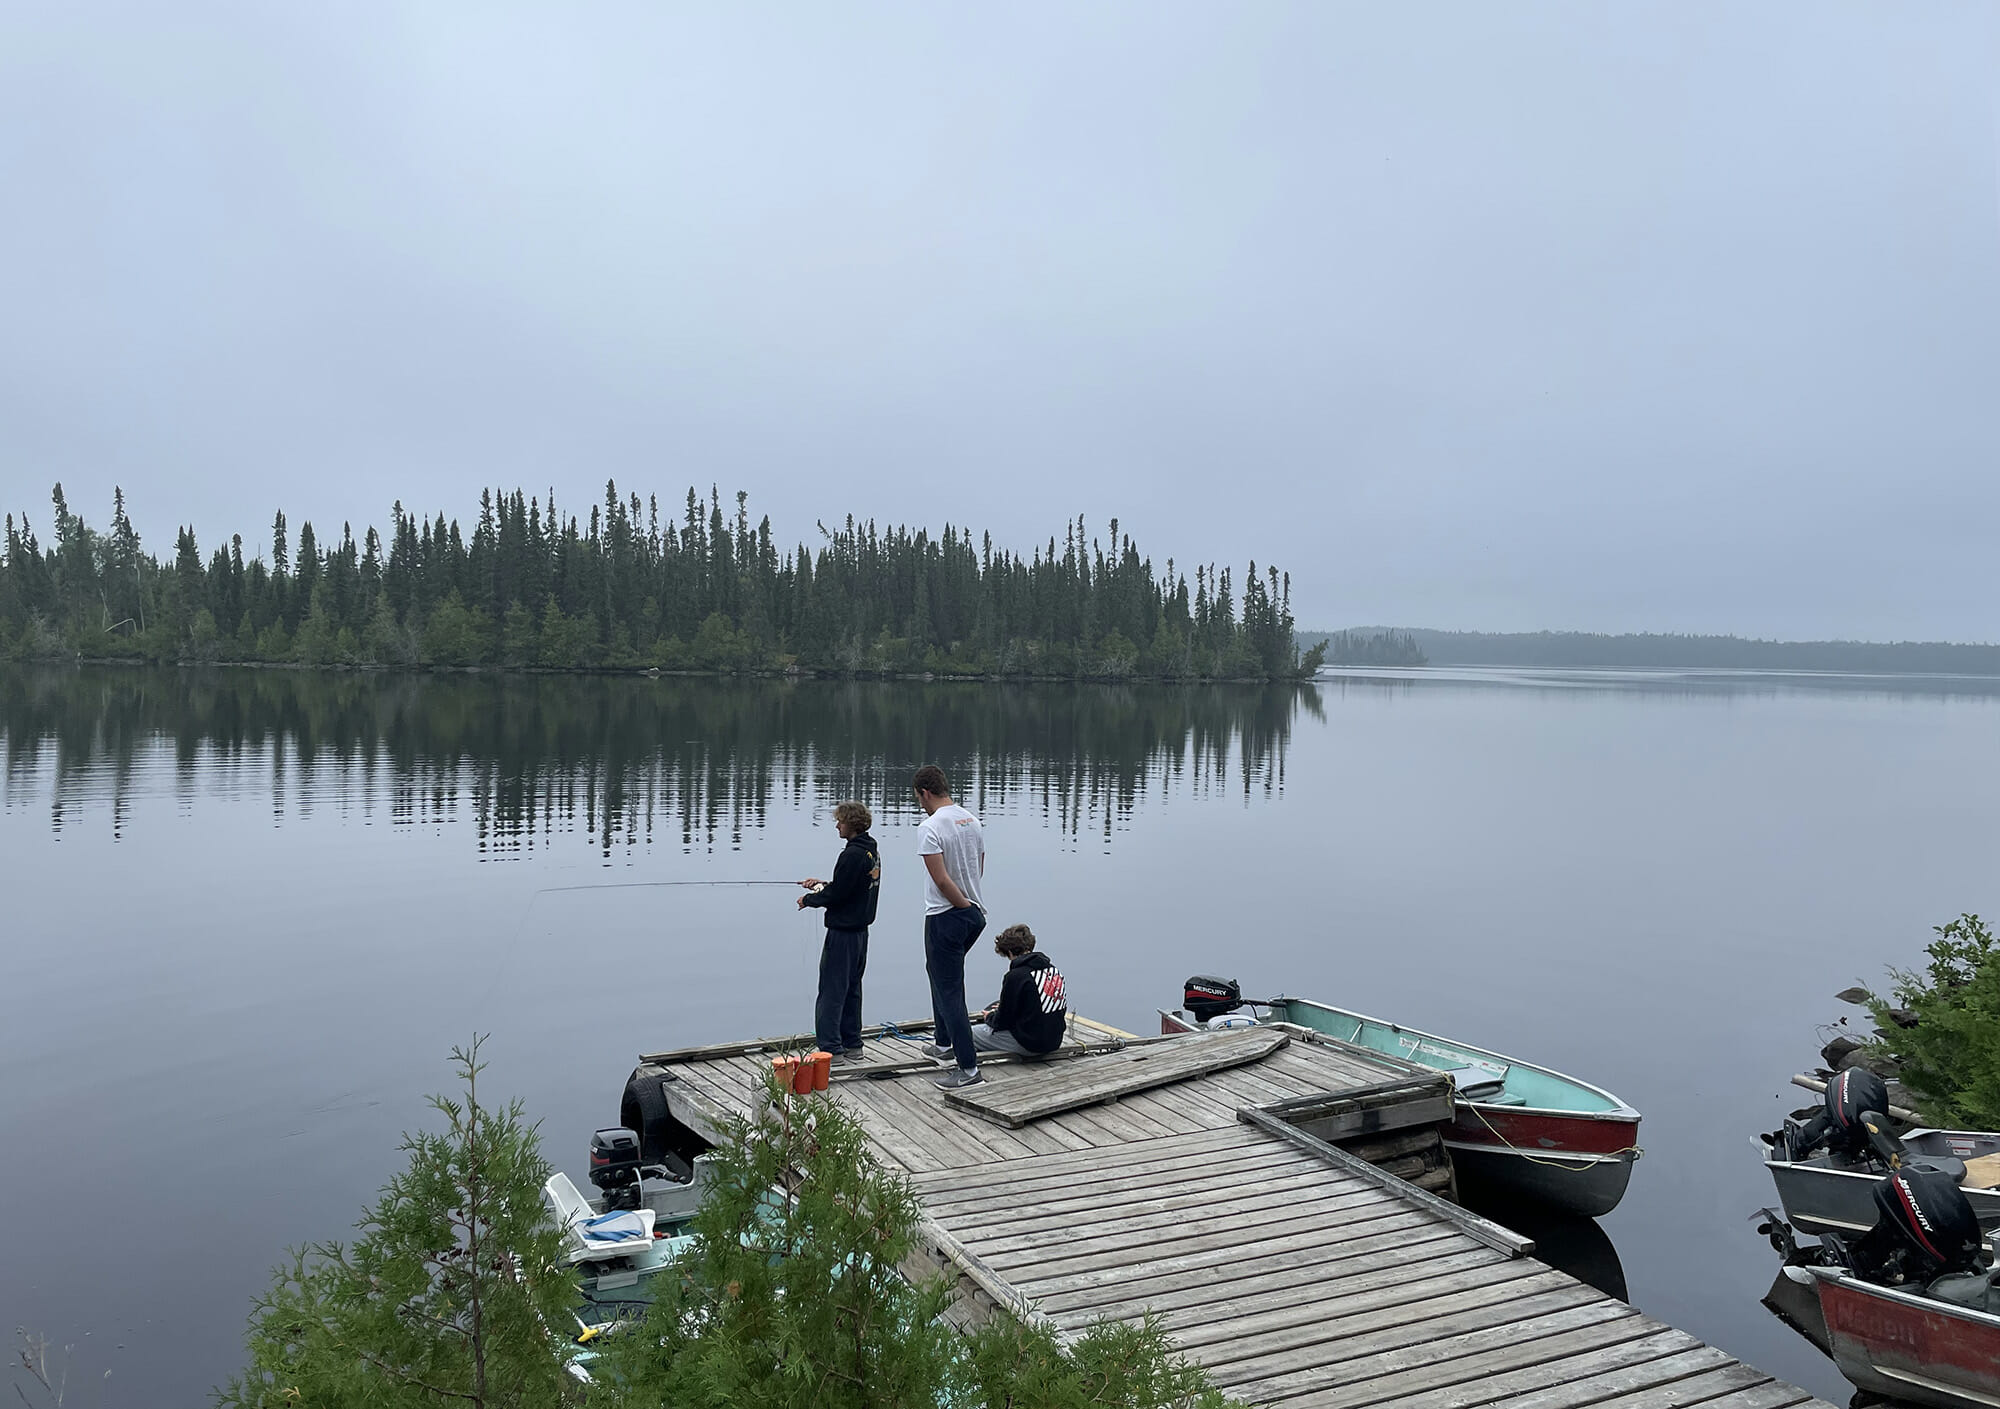 Three young men fishing from a dock with a big, beautiful, calm lake in the background